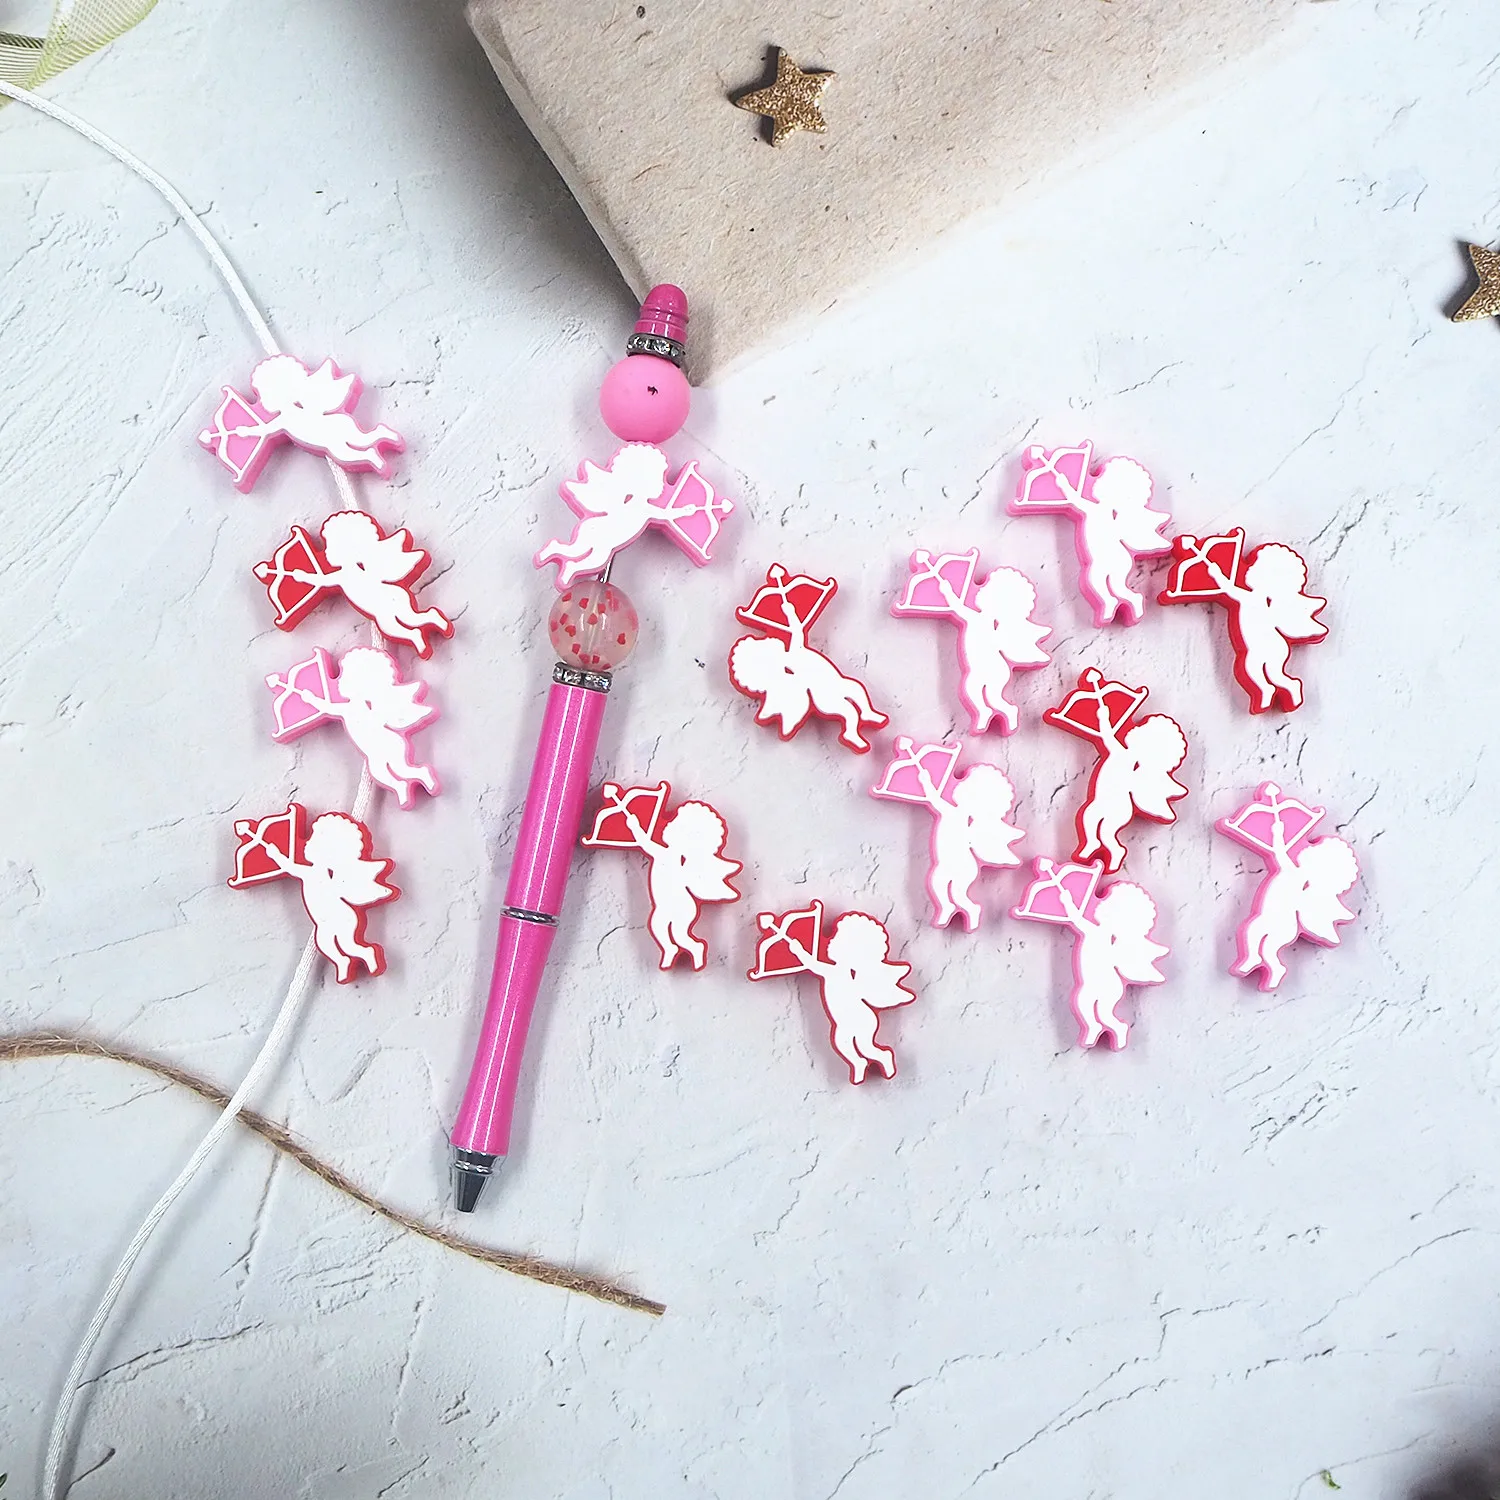 chenkai-50pcs-cupid-silicone-focal-beads-for-beadable-pen-valentine's-day-silicone-charms-for-pen-making-character-beads